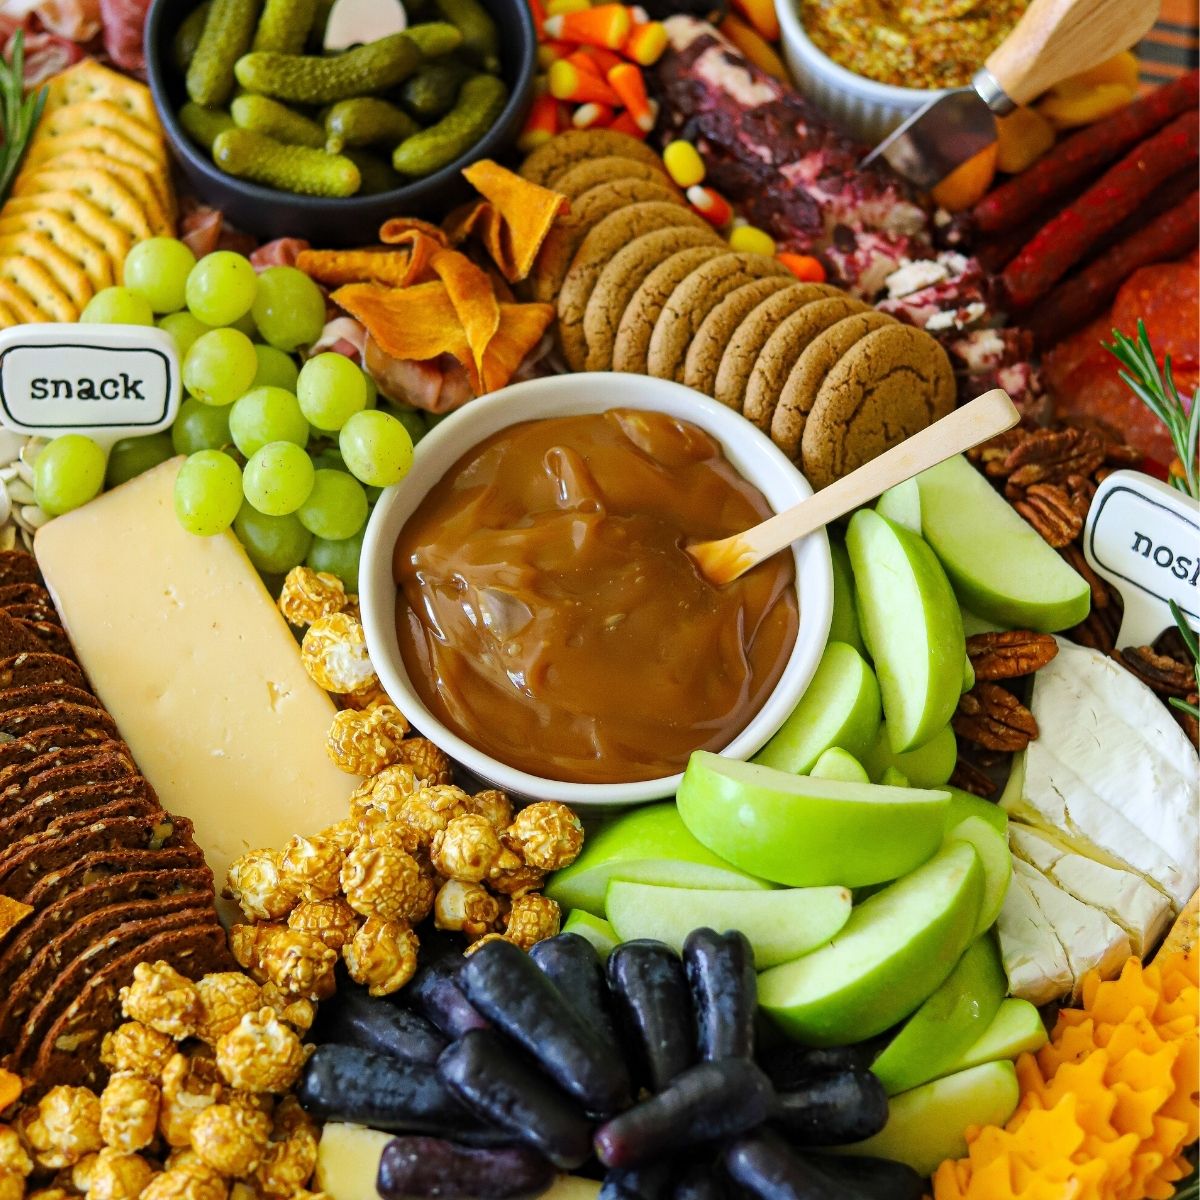 Fall Charcuterie Board - Home Sweet Table - Healthy, fresh, and simple  family-friendly recipes